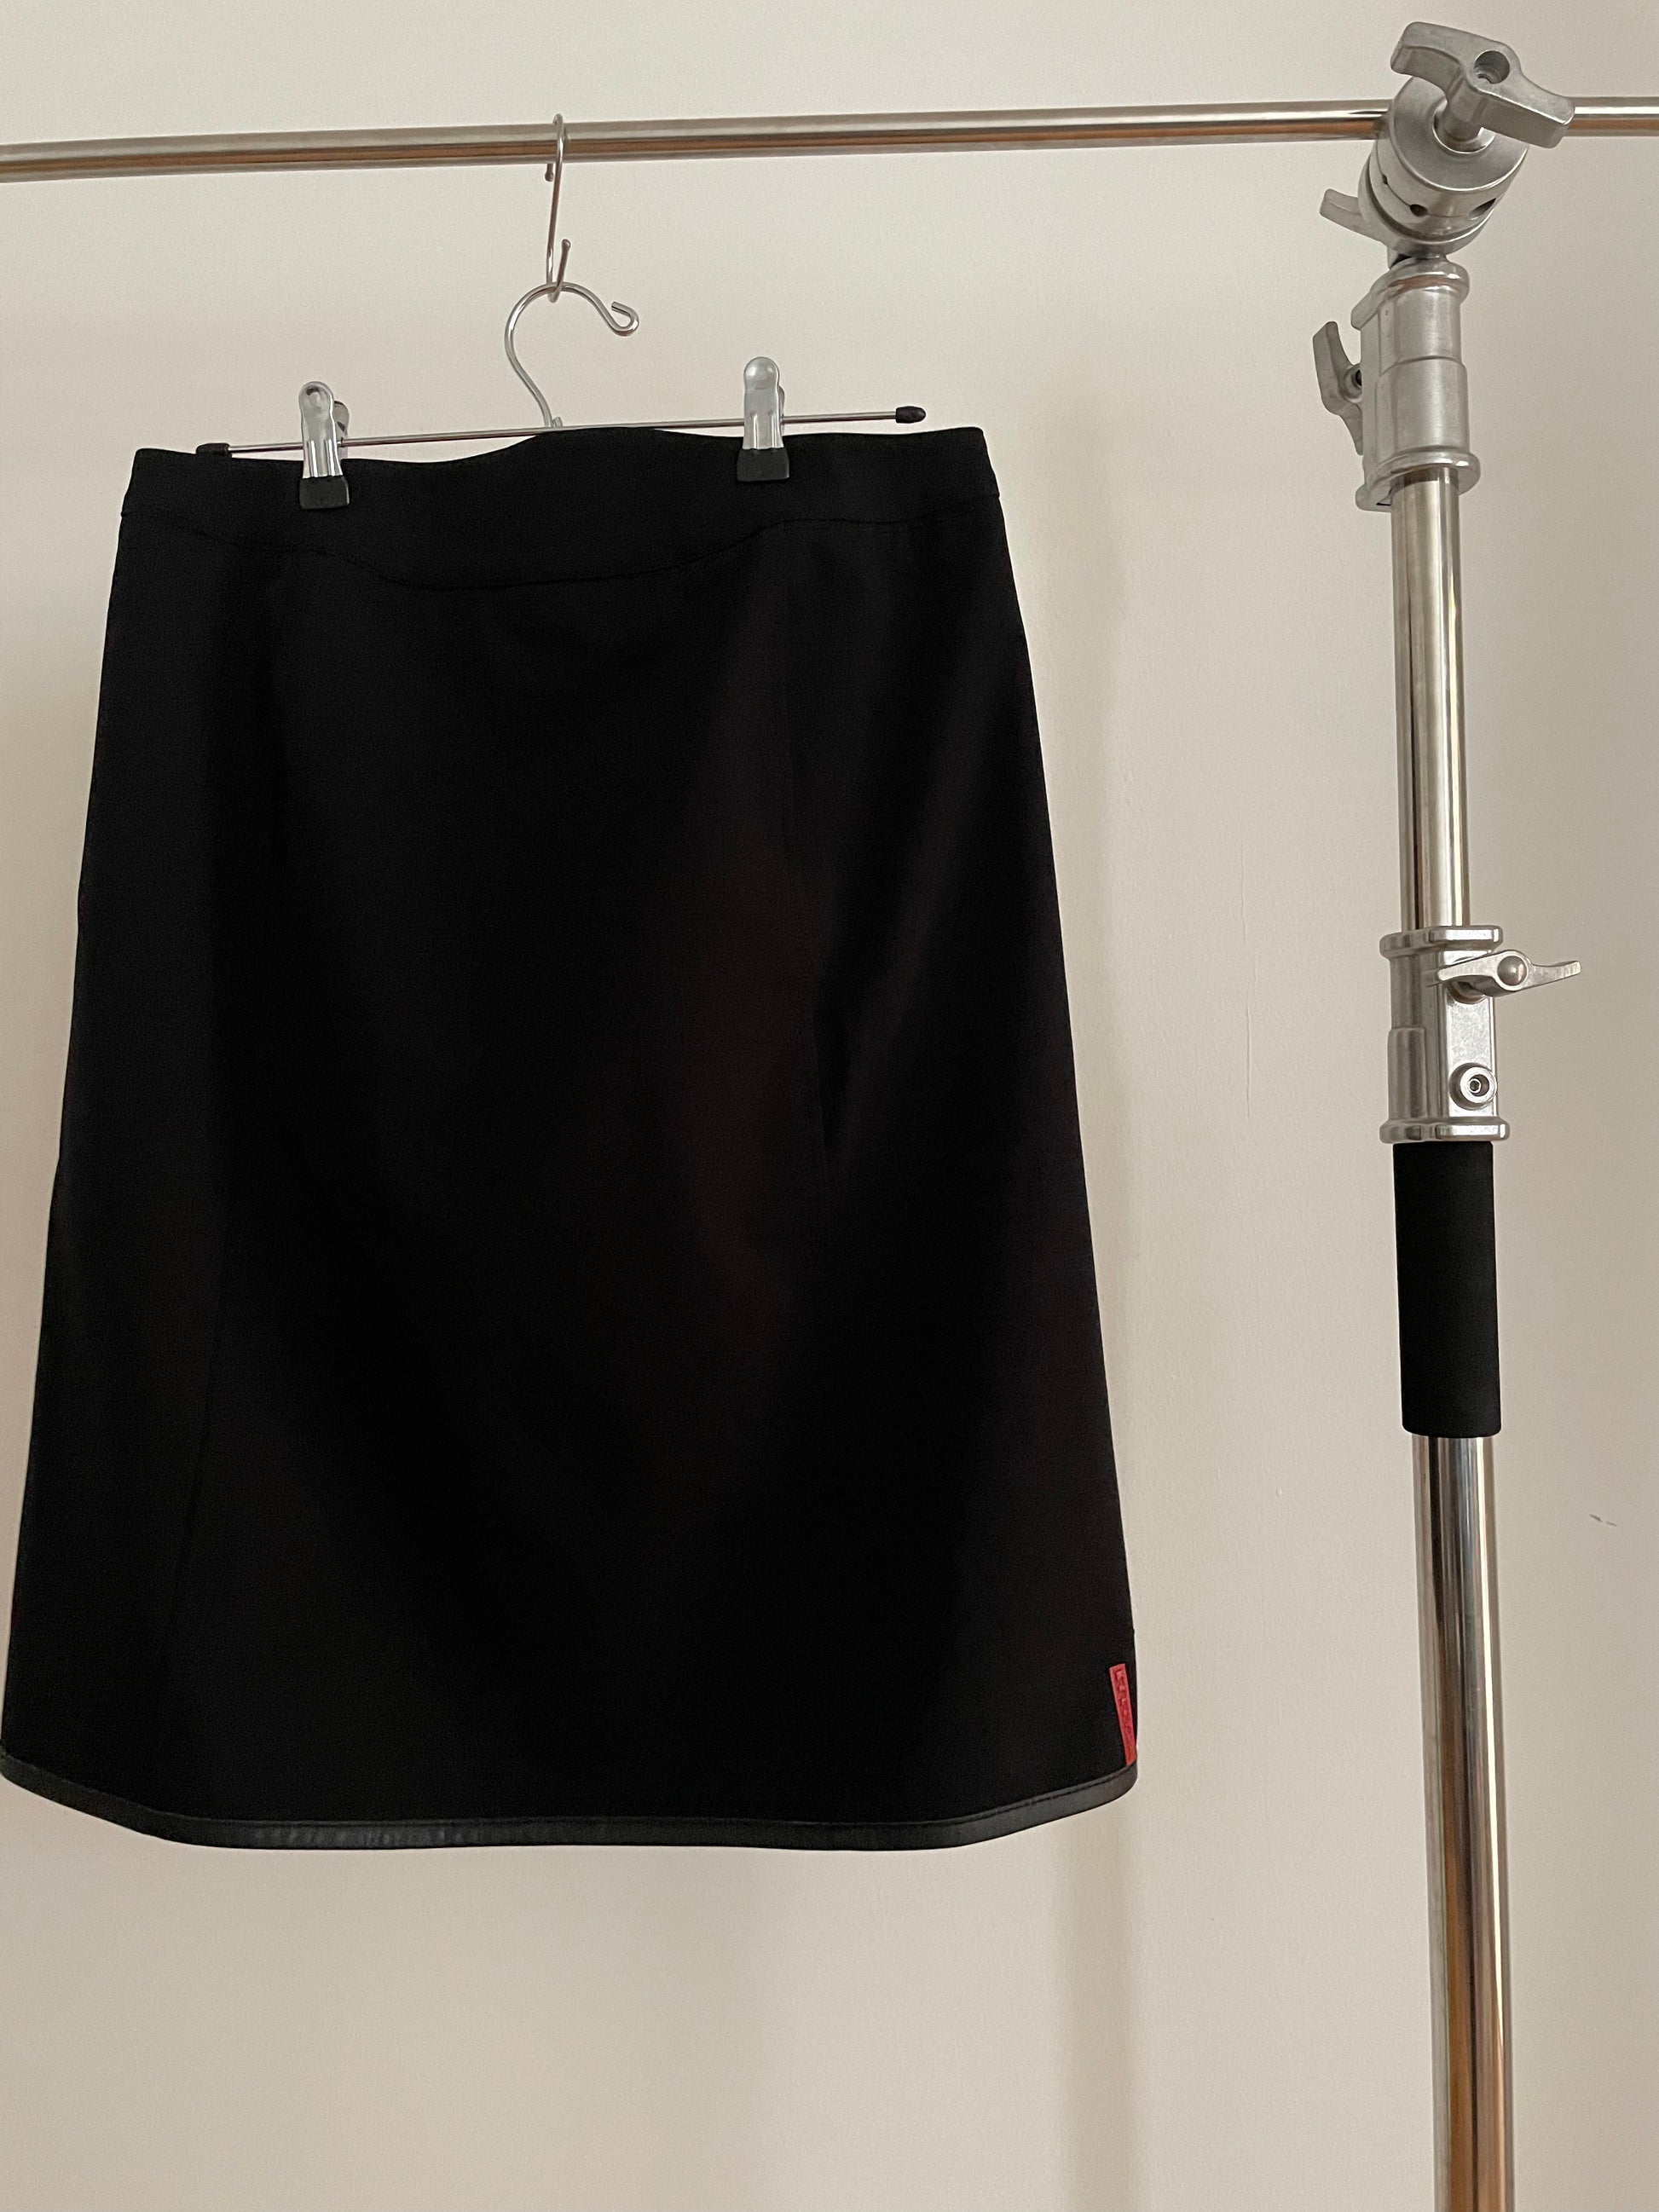 Back view of vintage womens Prada Sport black skirt with zippers